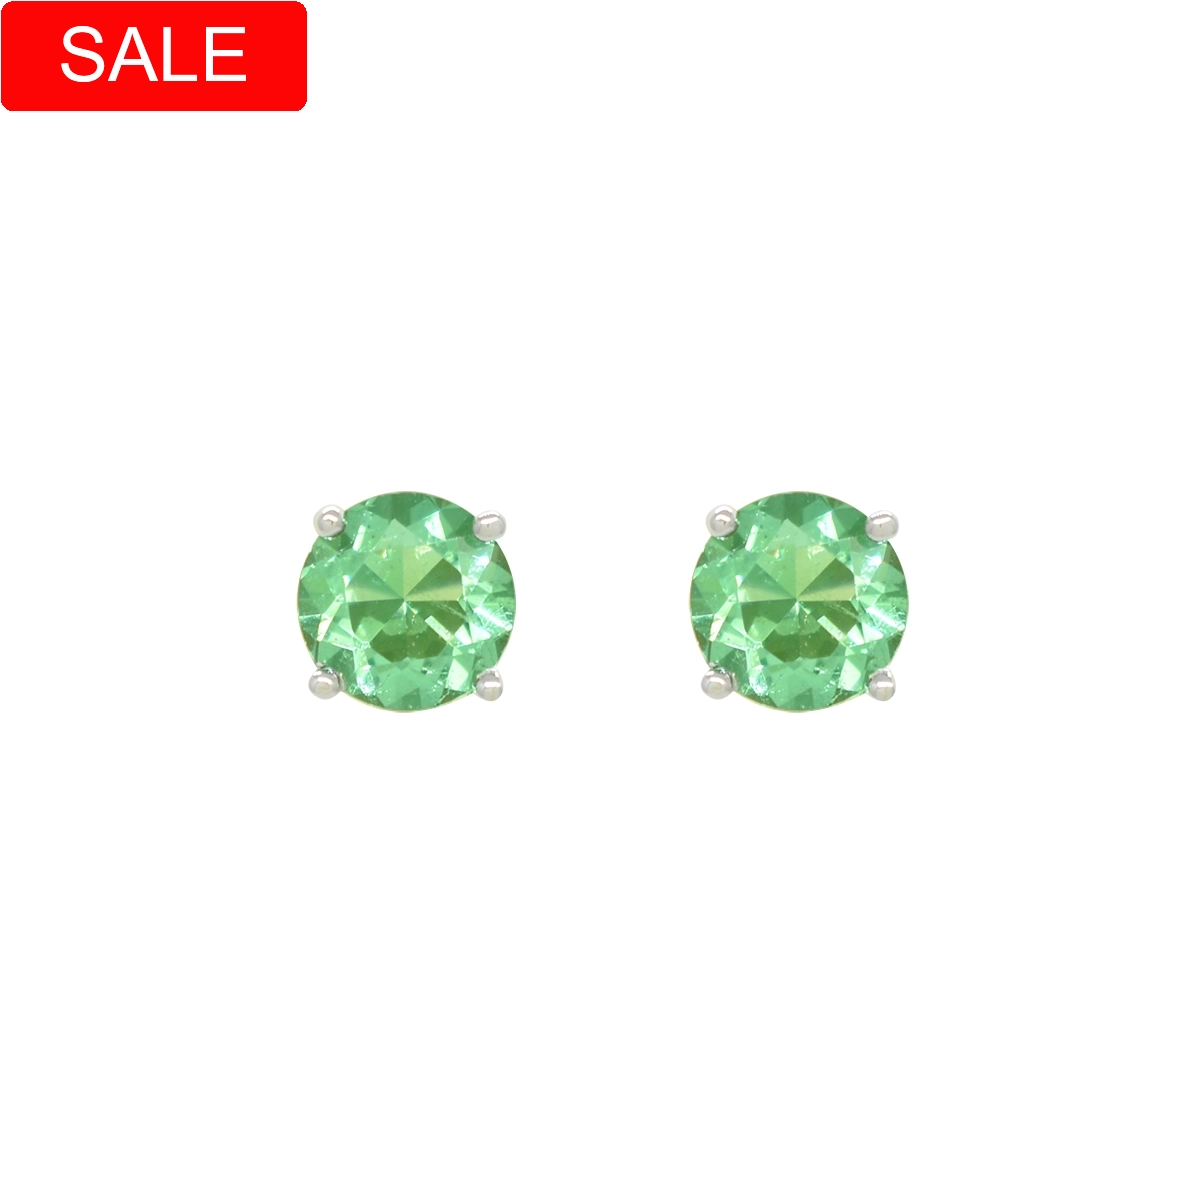 Stud earrings in white gold with round cut natural Colombian emeralds in classic 4-prong setting